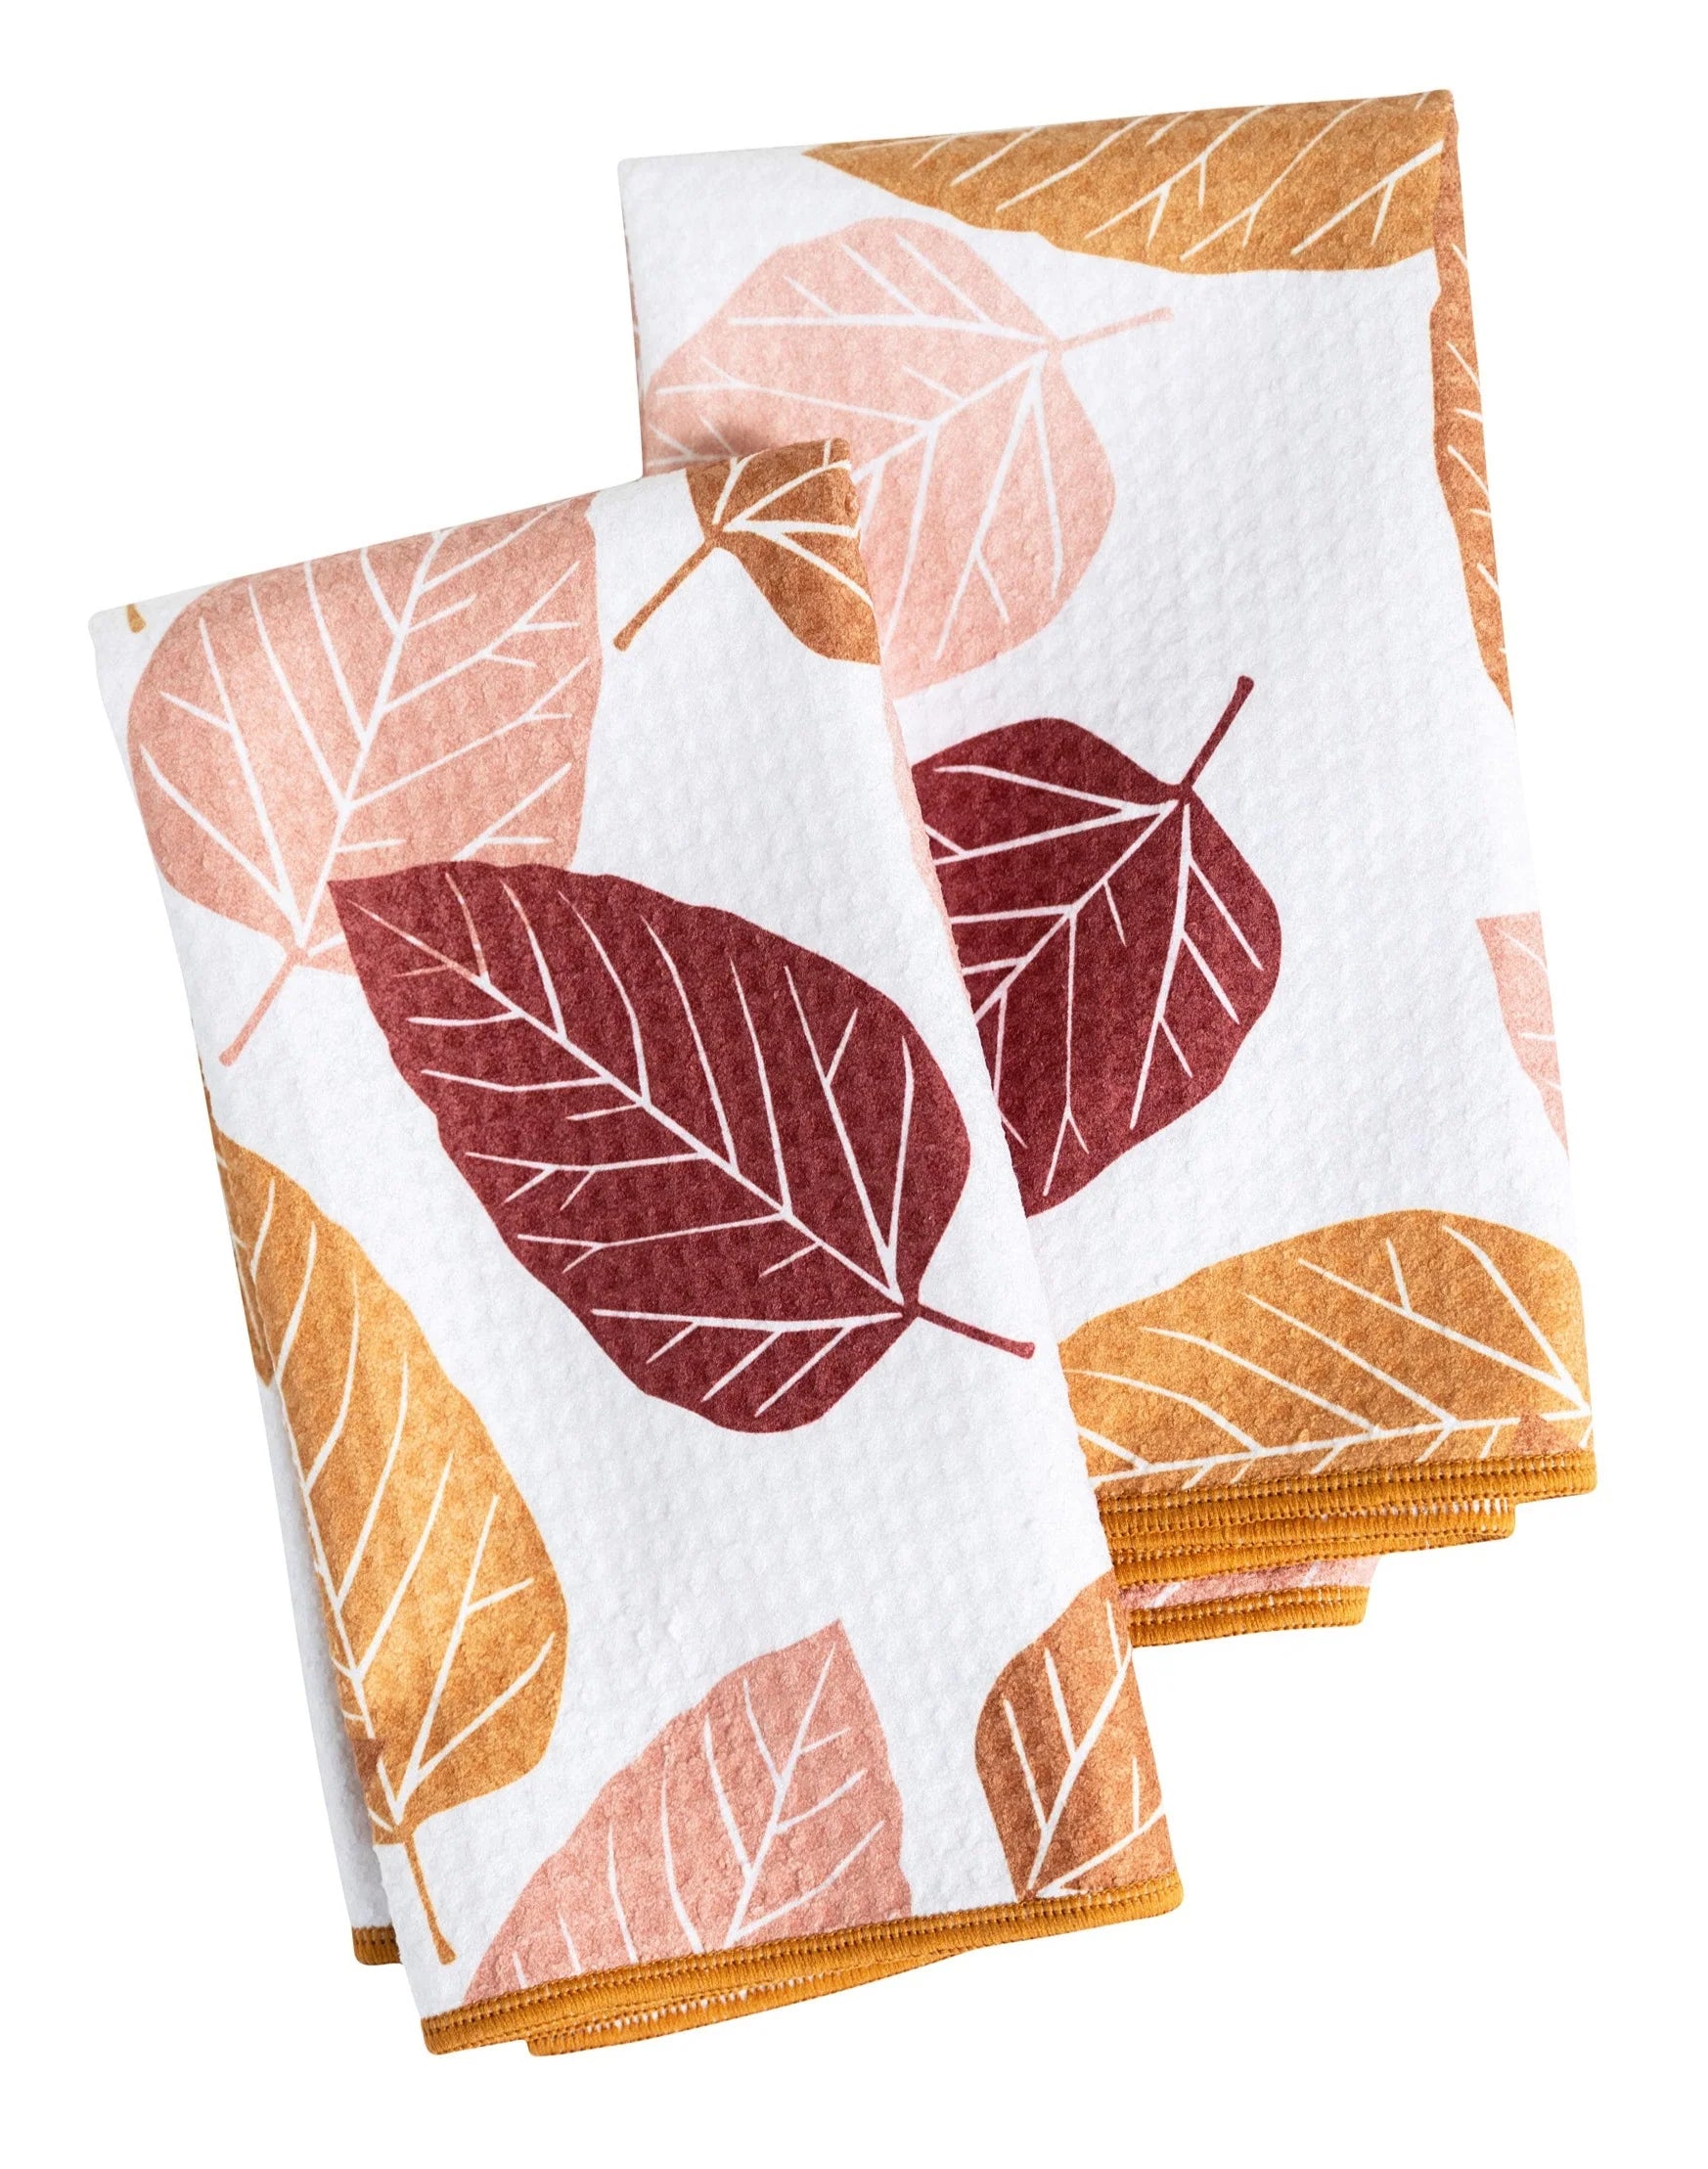 folded white biggie towels printed with leaves in shades of yellow pink and maroon.